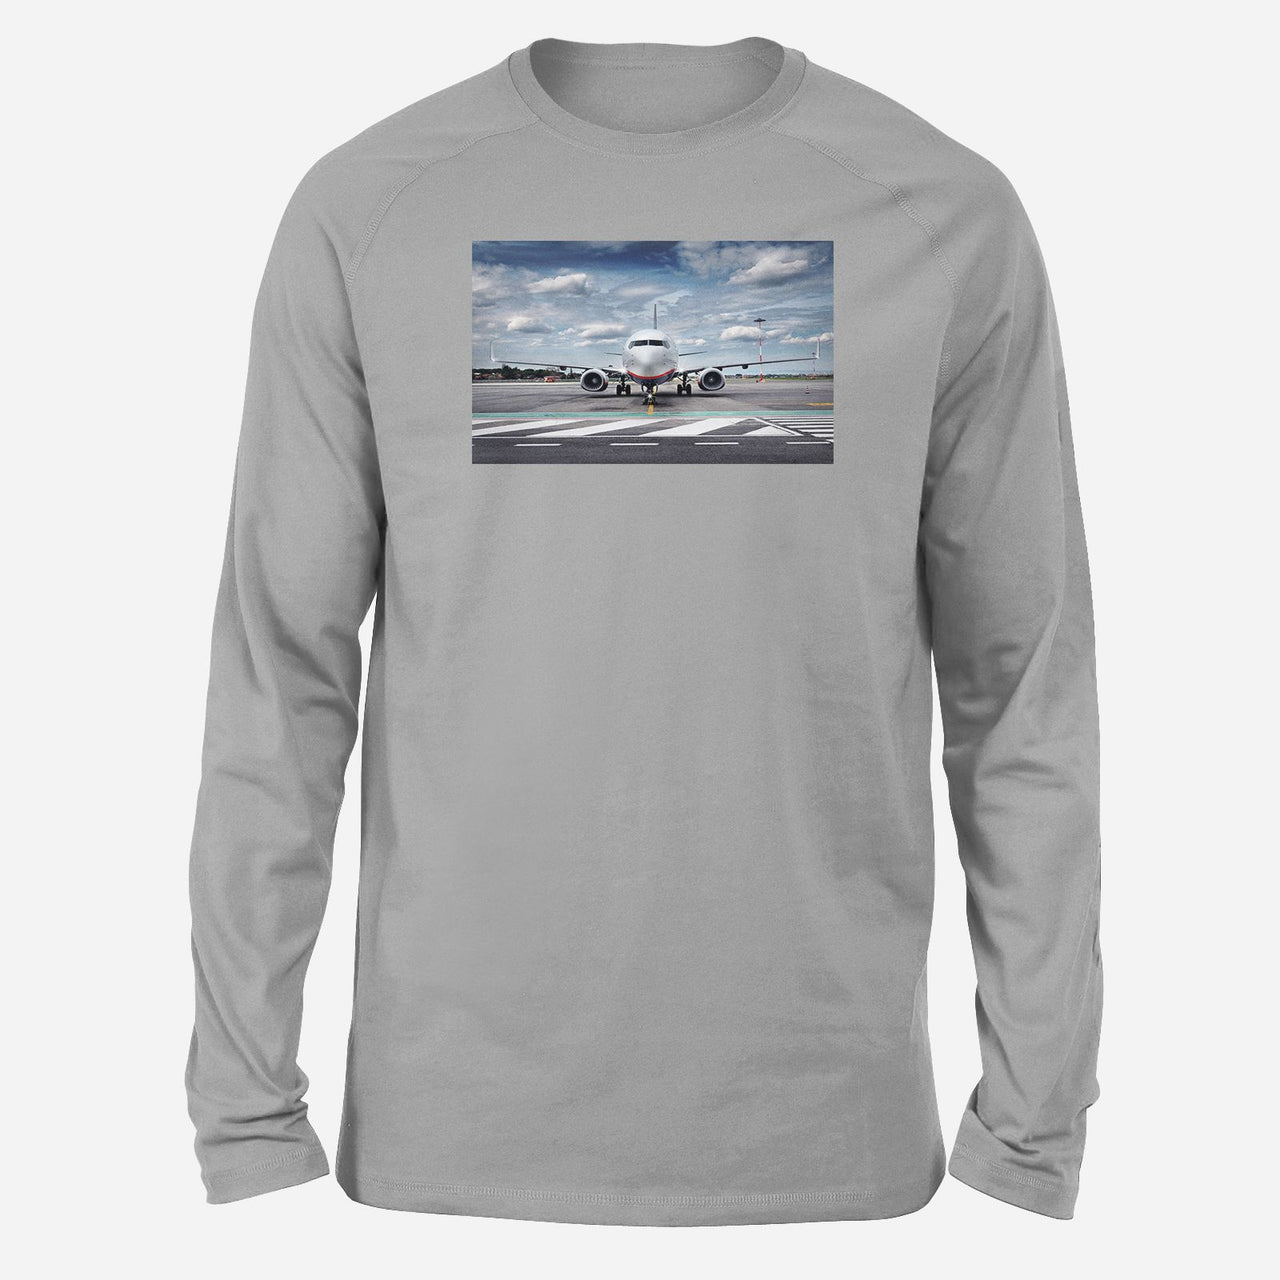 Amazing Clouds and Boeing 737 NG Designed Long-Sleeve T-Shirts